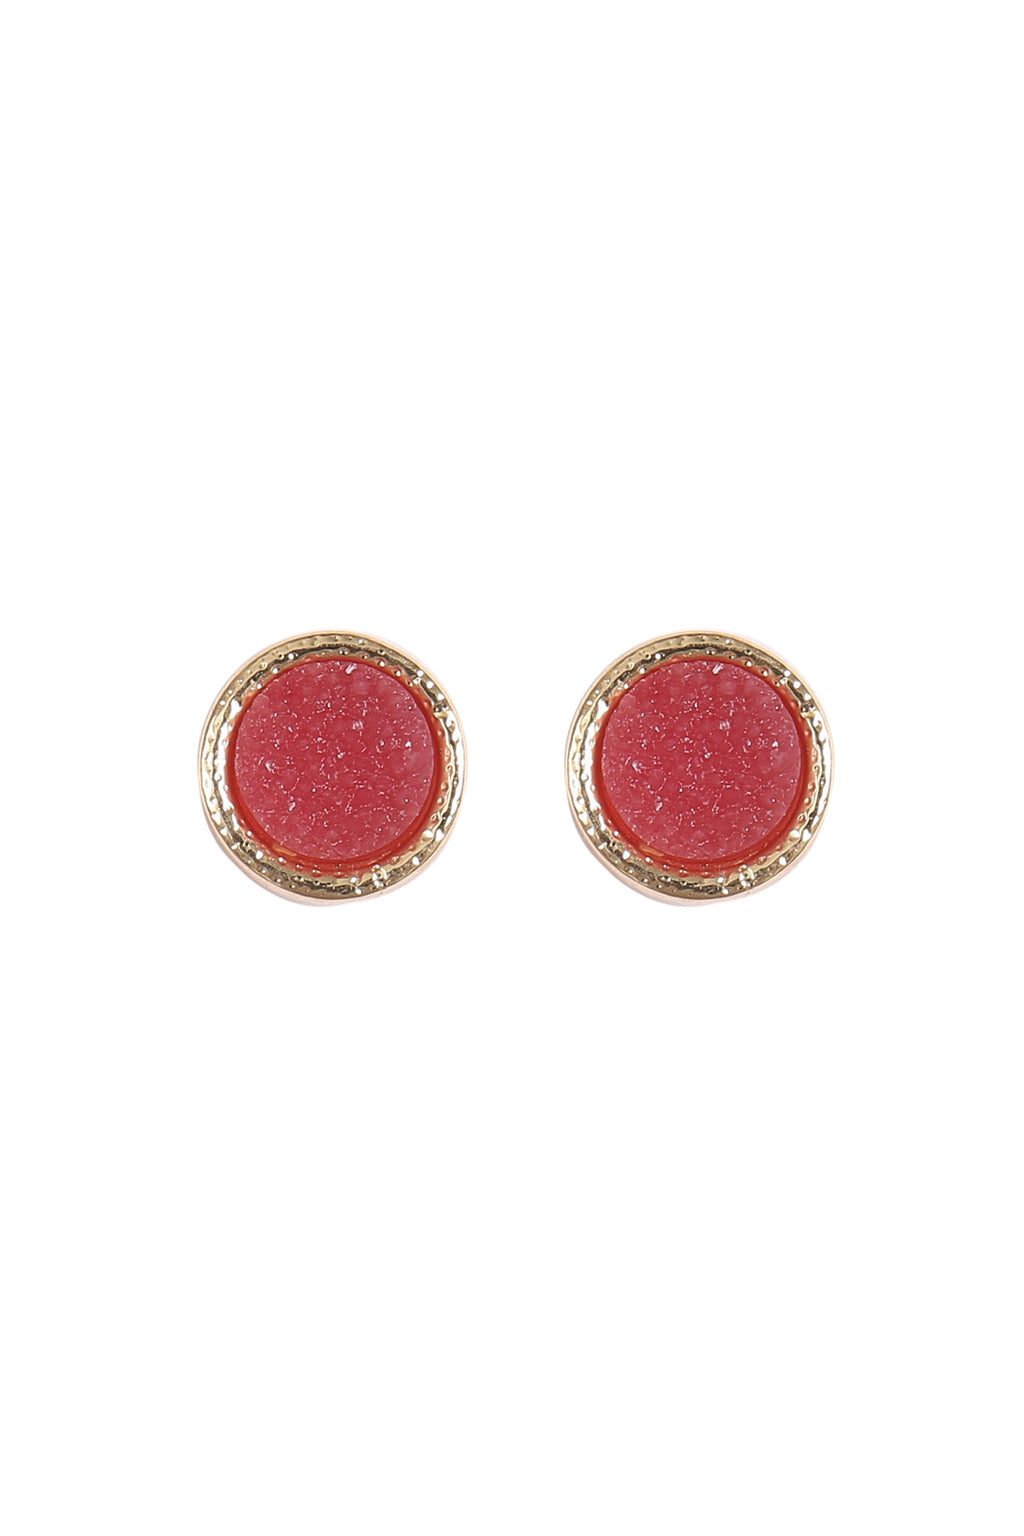 Round Druzy Stone Post Earrings Gold Fuchsia - Pack of 6